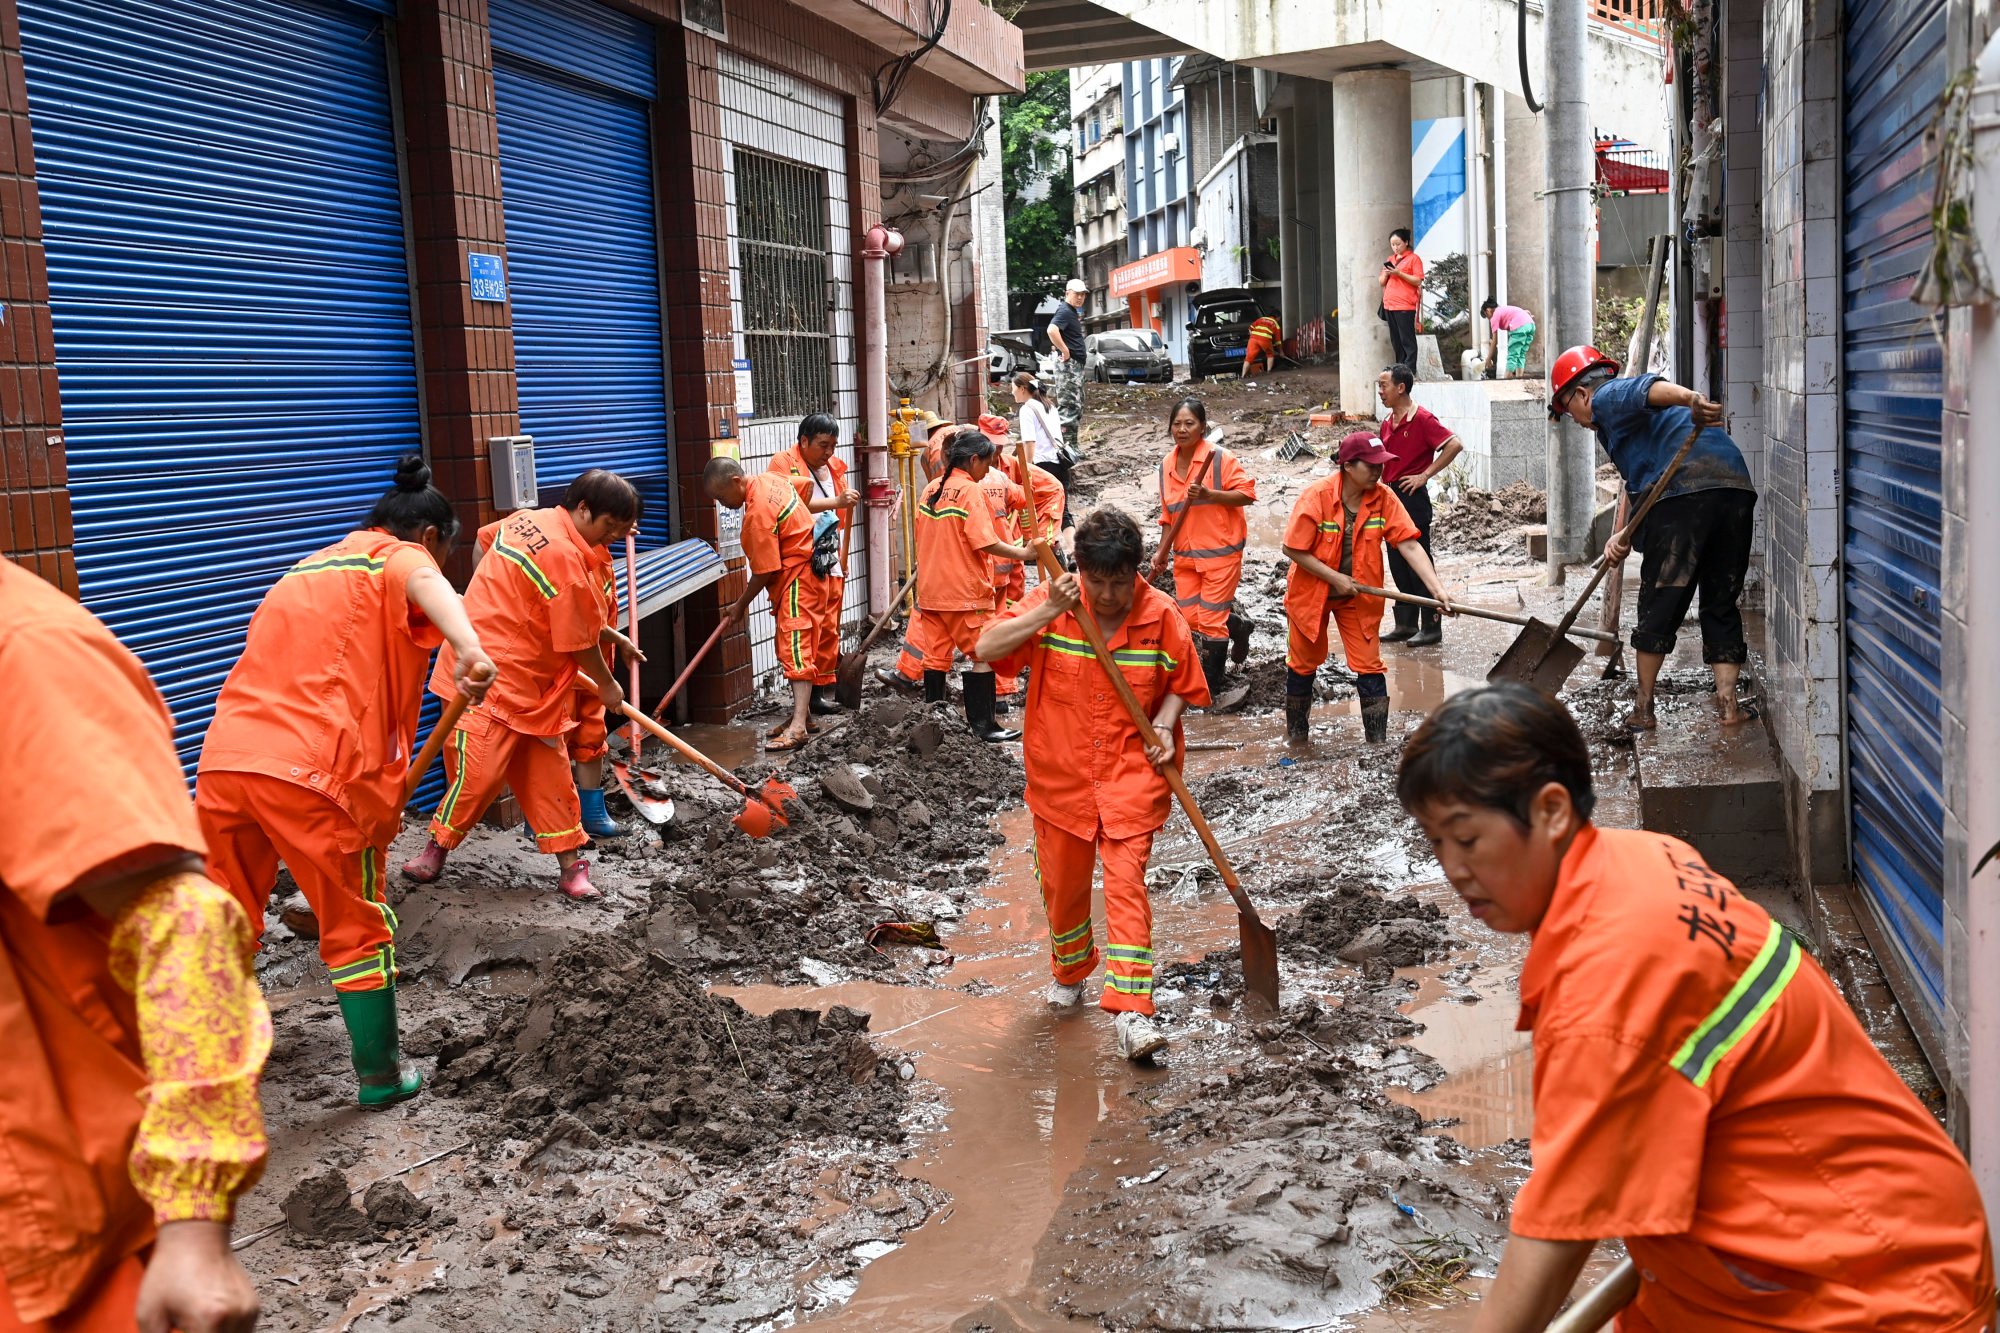 Clean-up operations get underway in the city’s Wanzhou district. Photo: AP